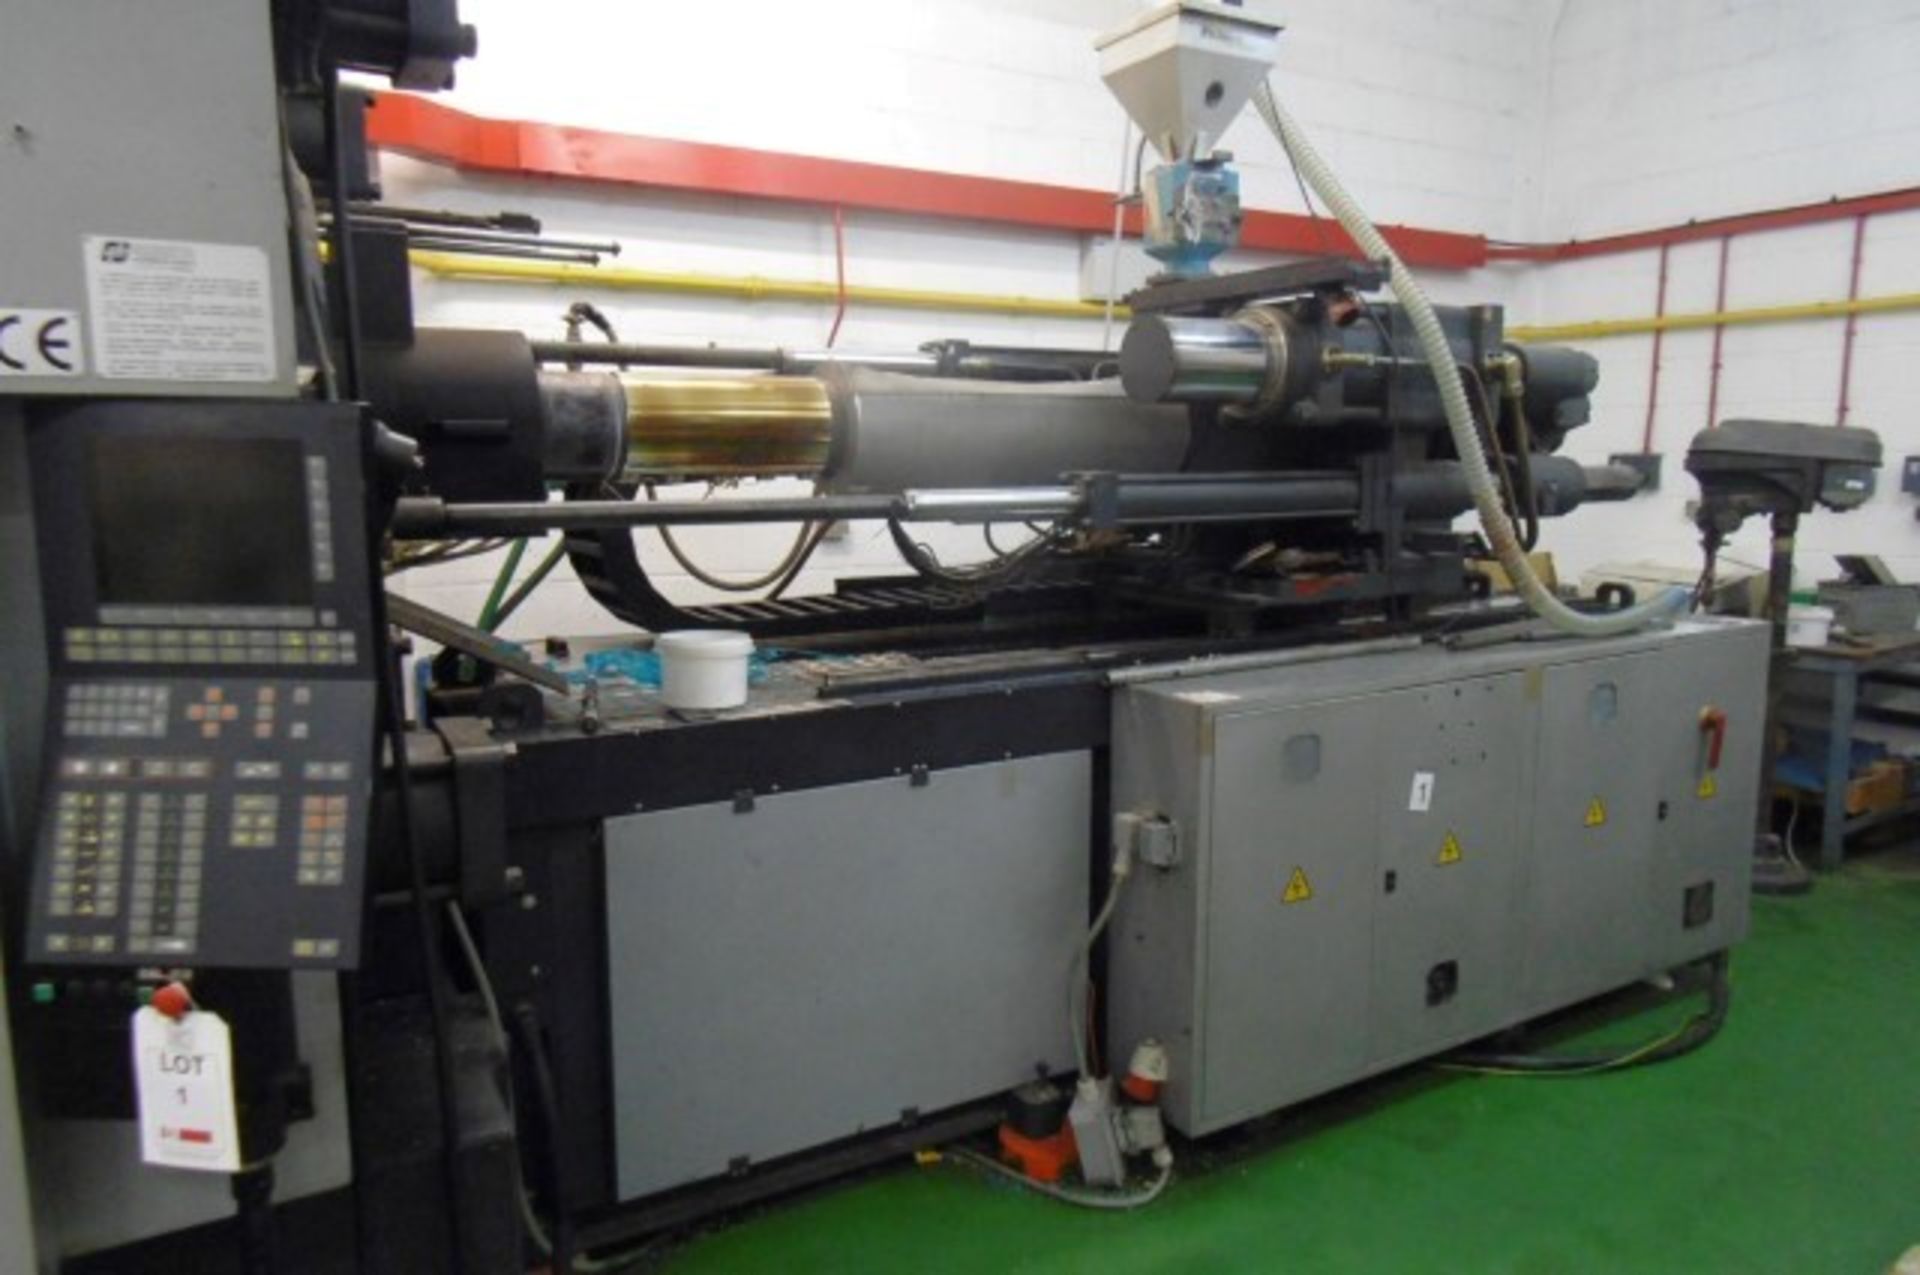 Sandretto 4170/700 Mega TES 7000 plastic injection moulding machine with Dal maschio 3 axis load - Image 2 of 6